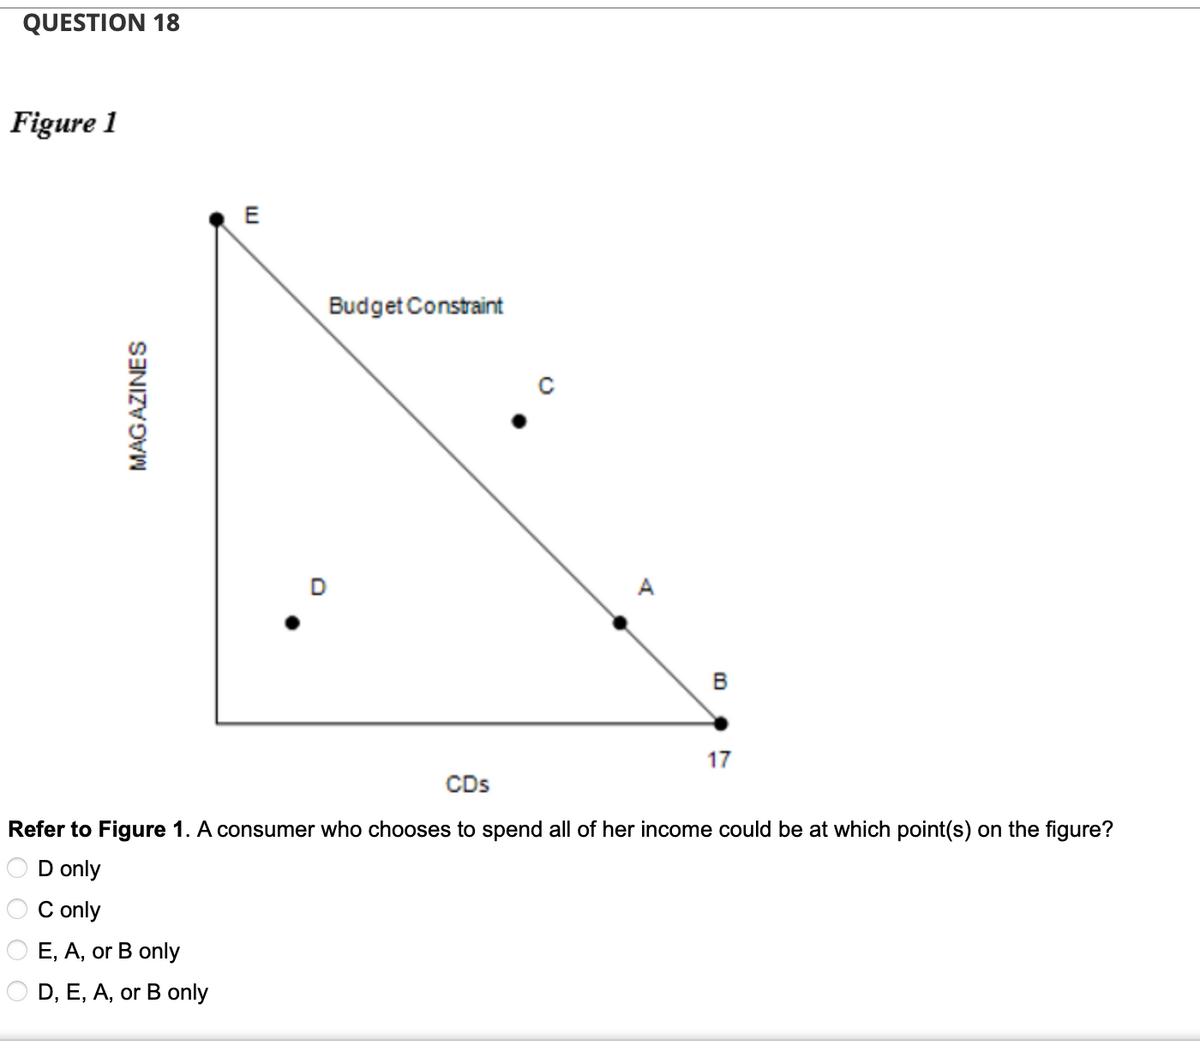 QUESTION 18
Figure 1
MAGAZINES
E
Budget Constraint
A
B
17
CDs
Refer to Figure 1. A consumer who chooses to spend all of her income could be at which point(s) on the figure?
D only
C only
OE, A, or B only
OD, E, A, or B only